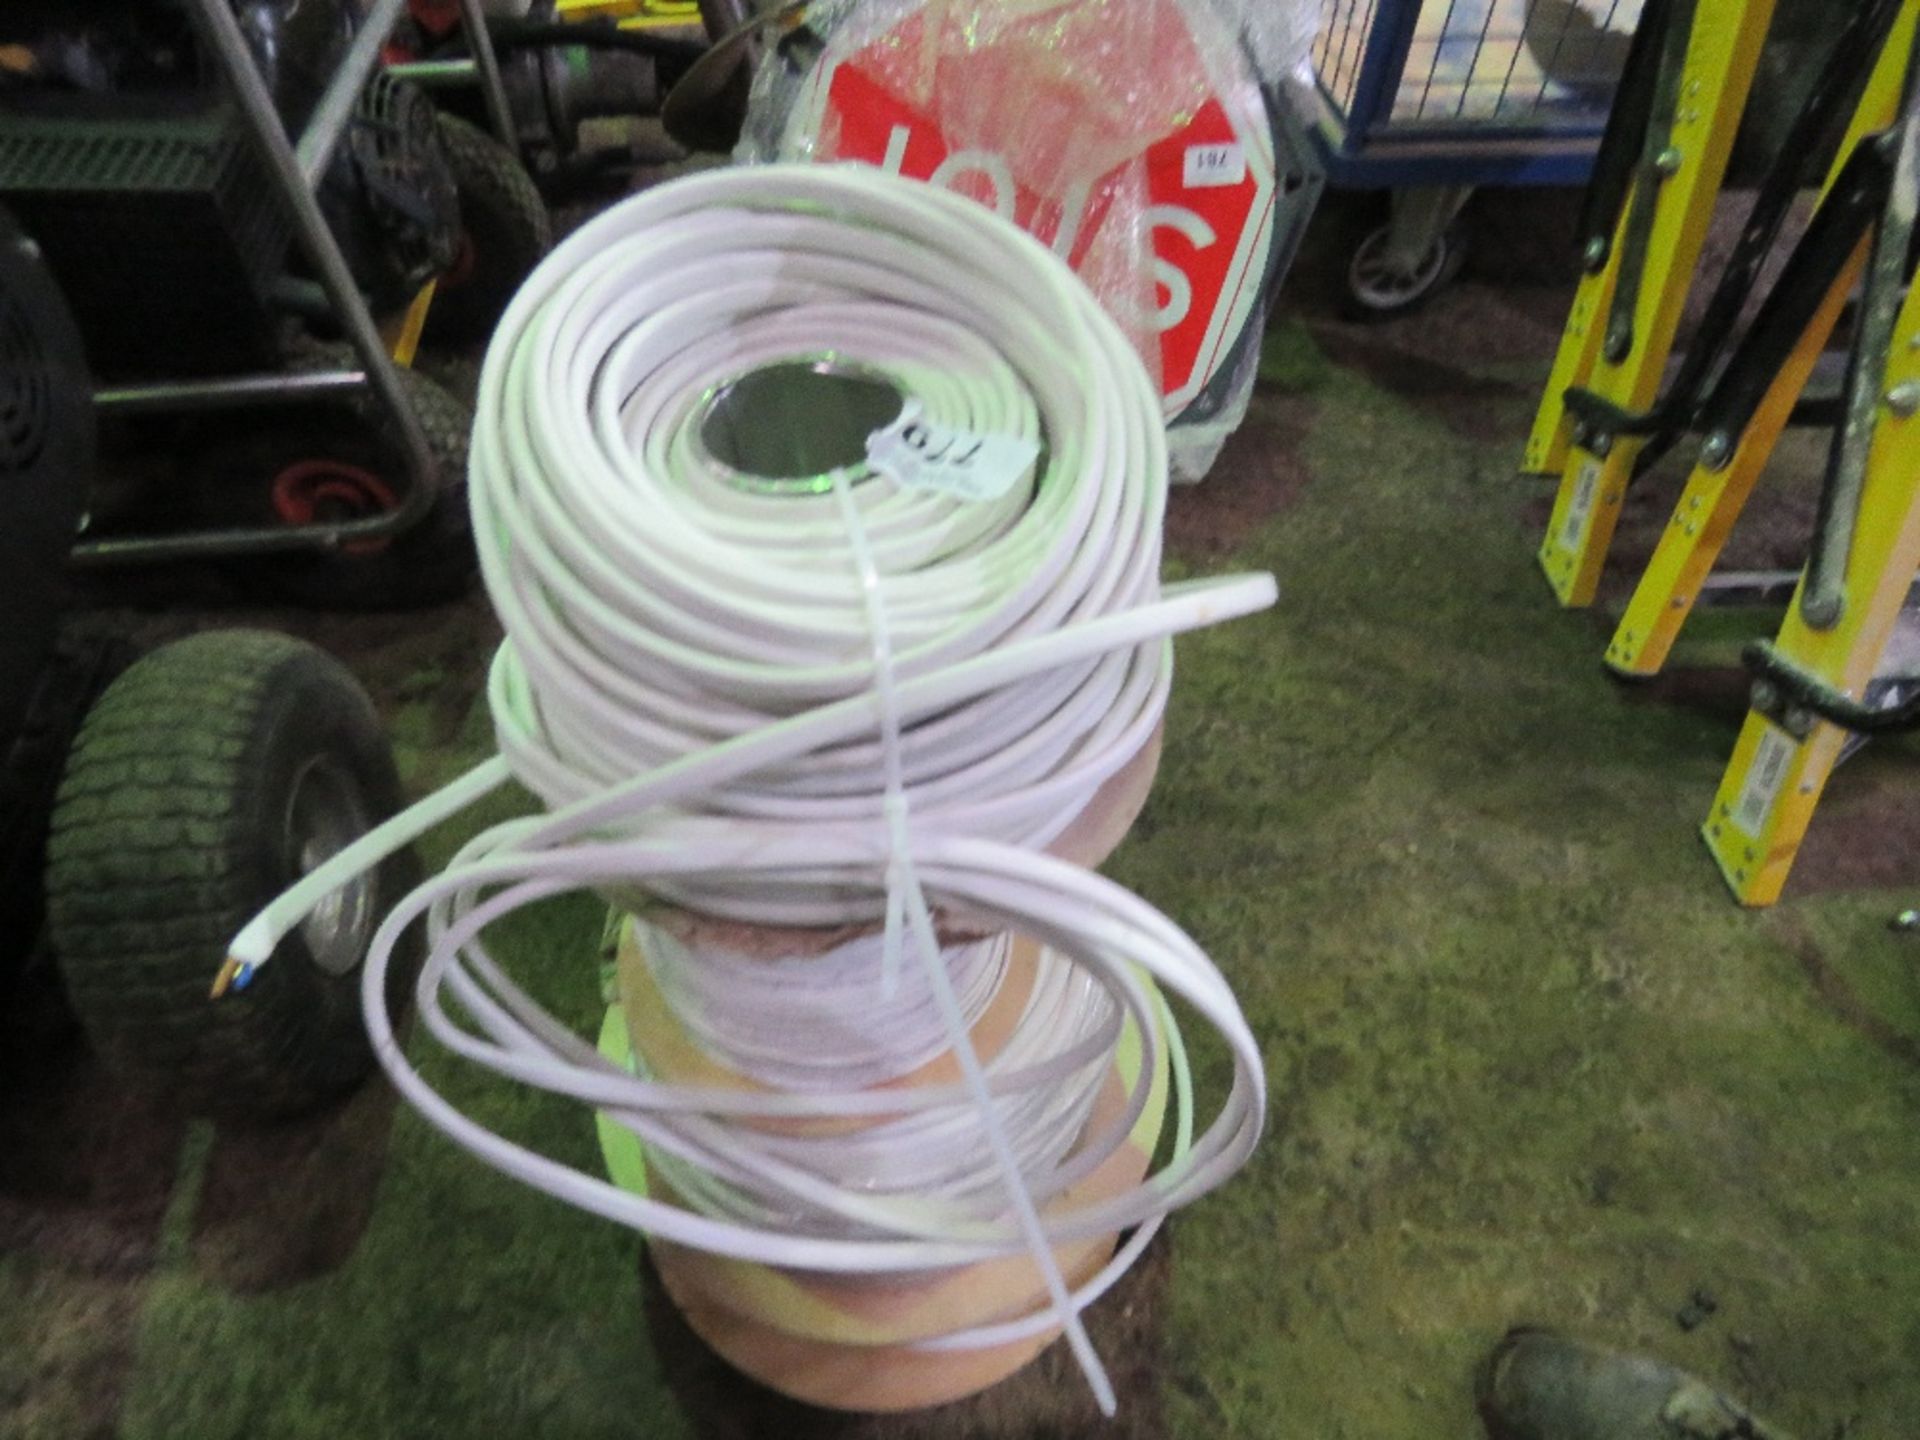 4X ROLLS OF WHITE WIRE SOURCED FROM LARGE CONSTRUCTION COMPANY LIQUIDATION. - Image 2 of 3